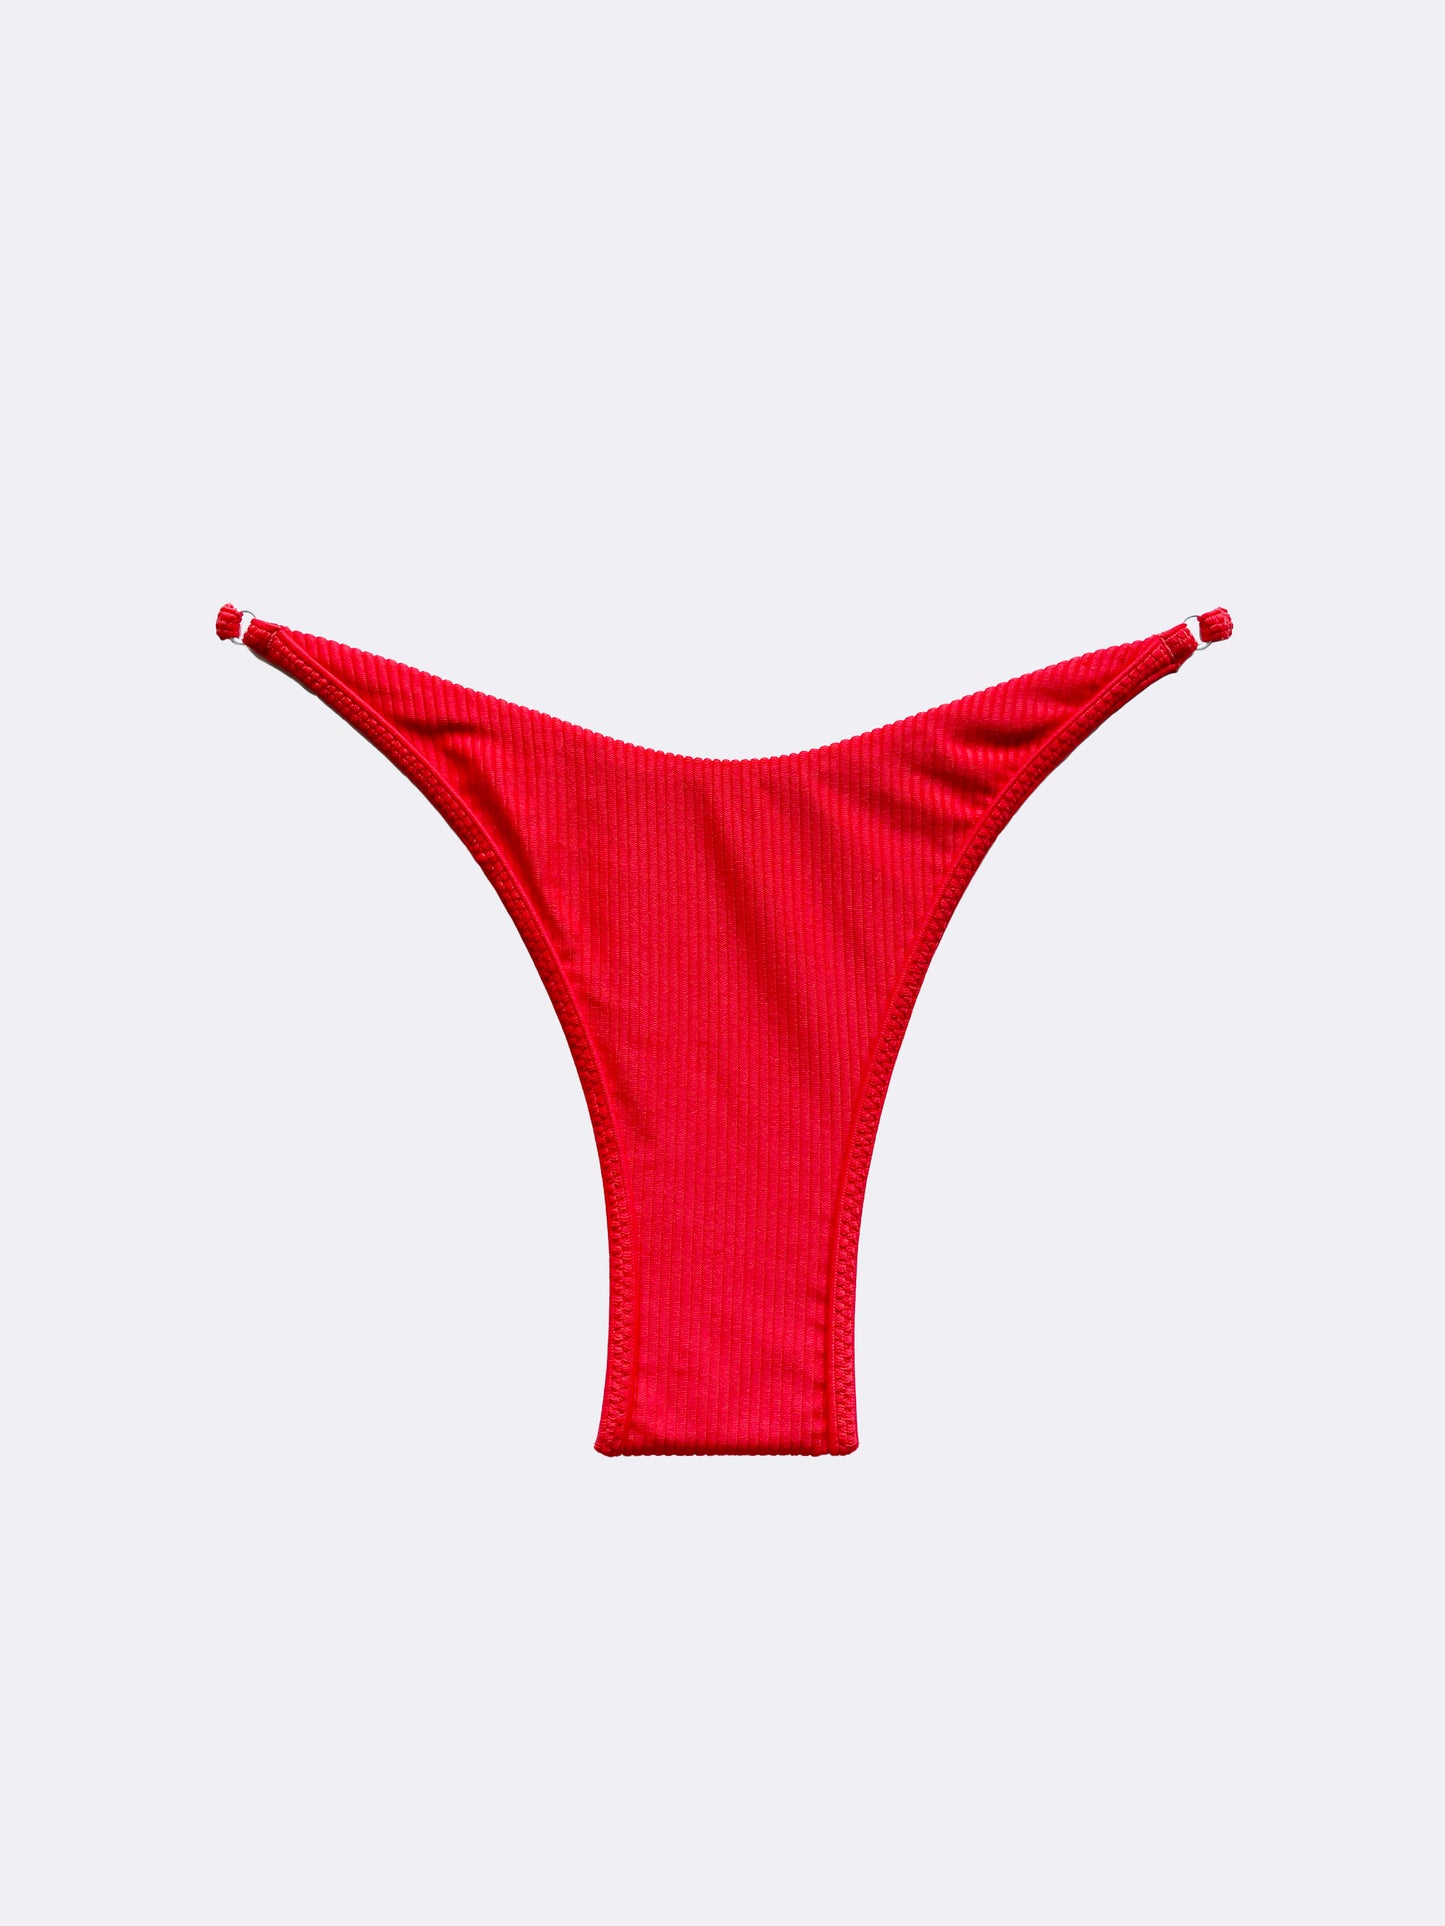 The Cape Ribbed Swim Bottom in Red